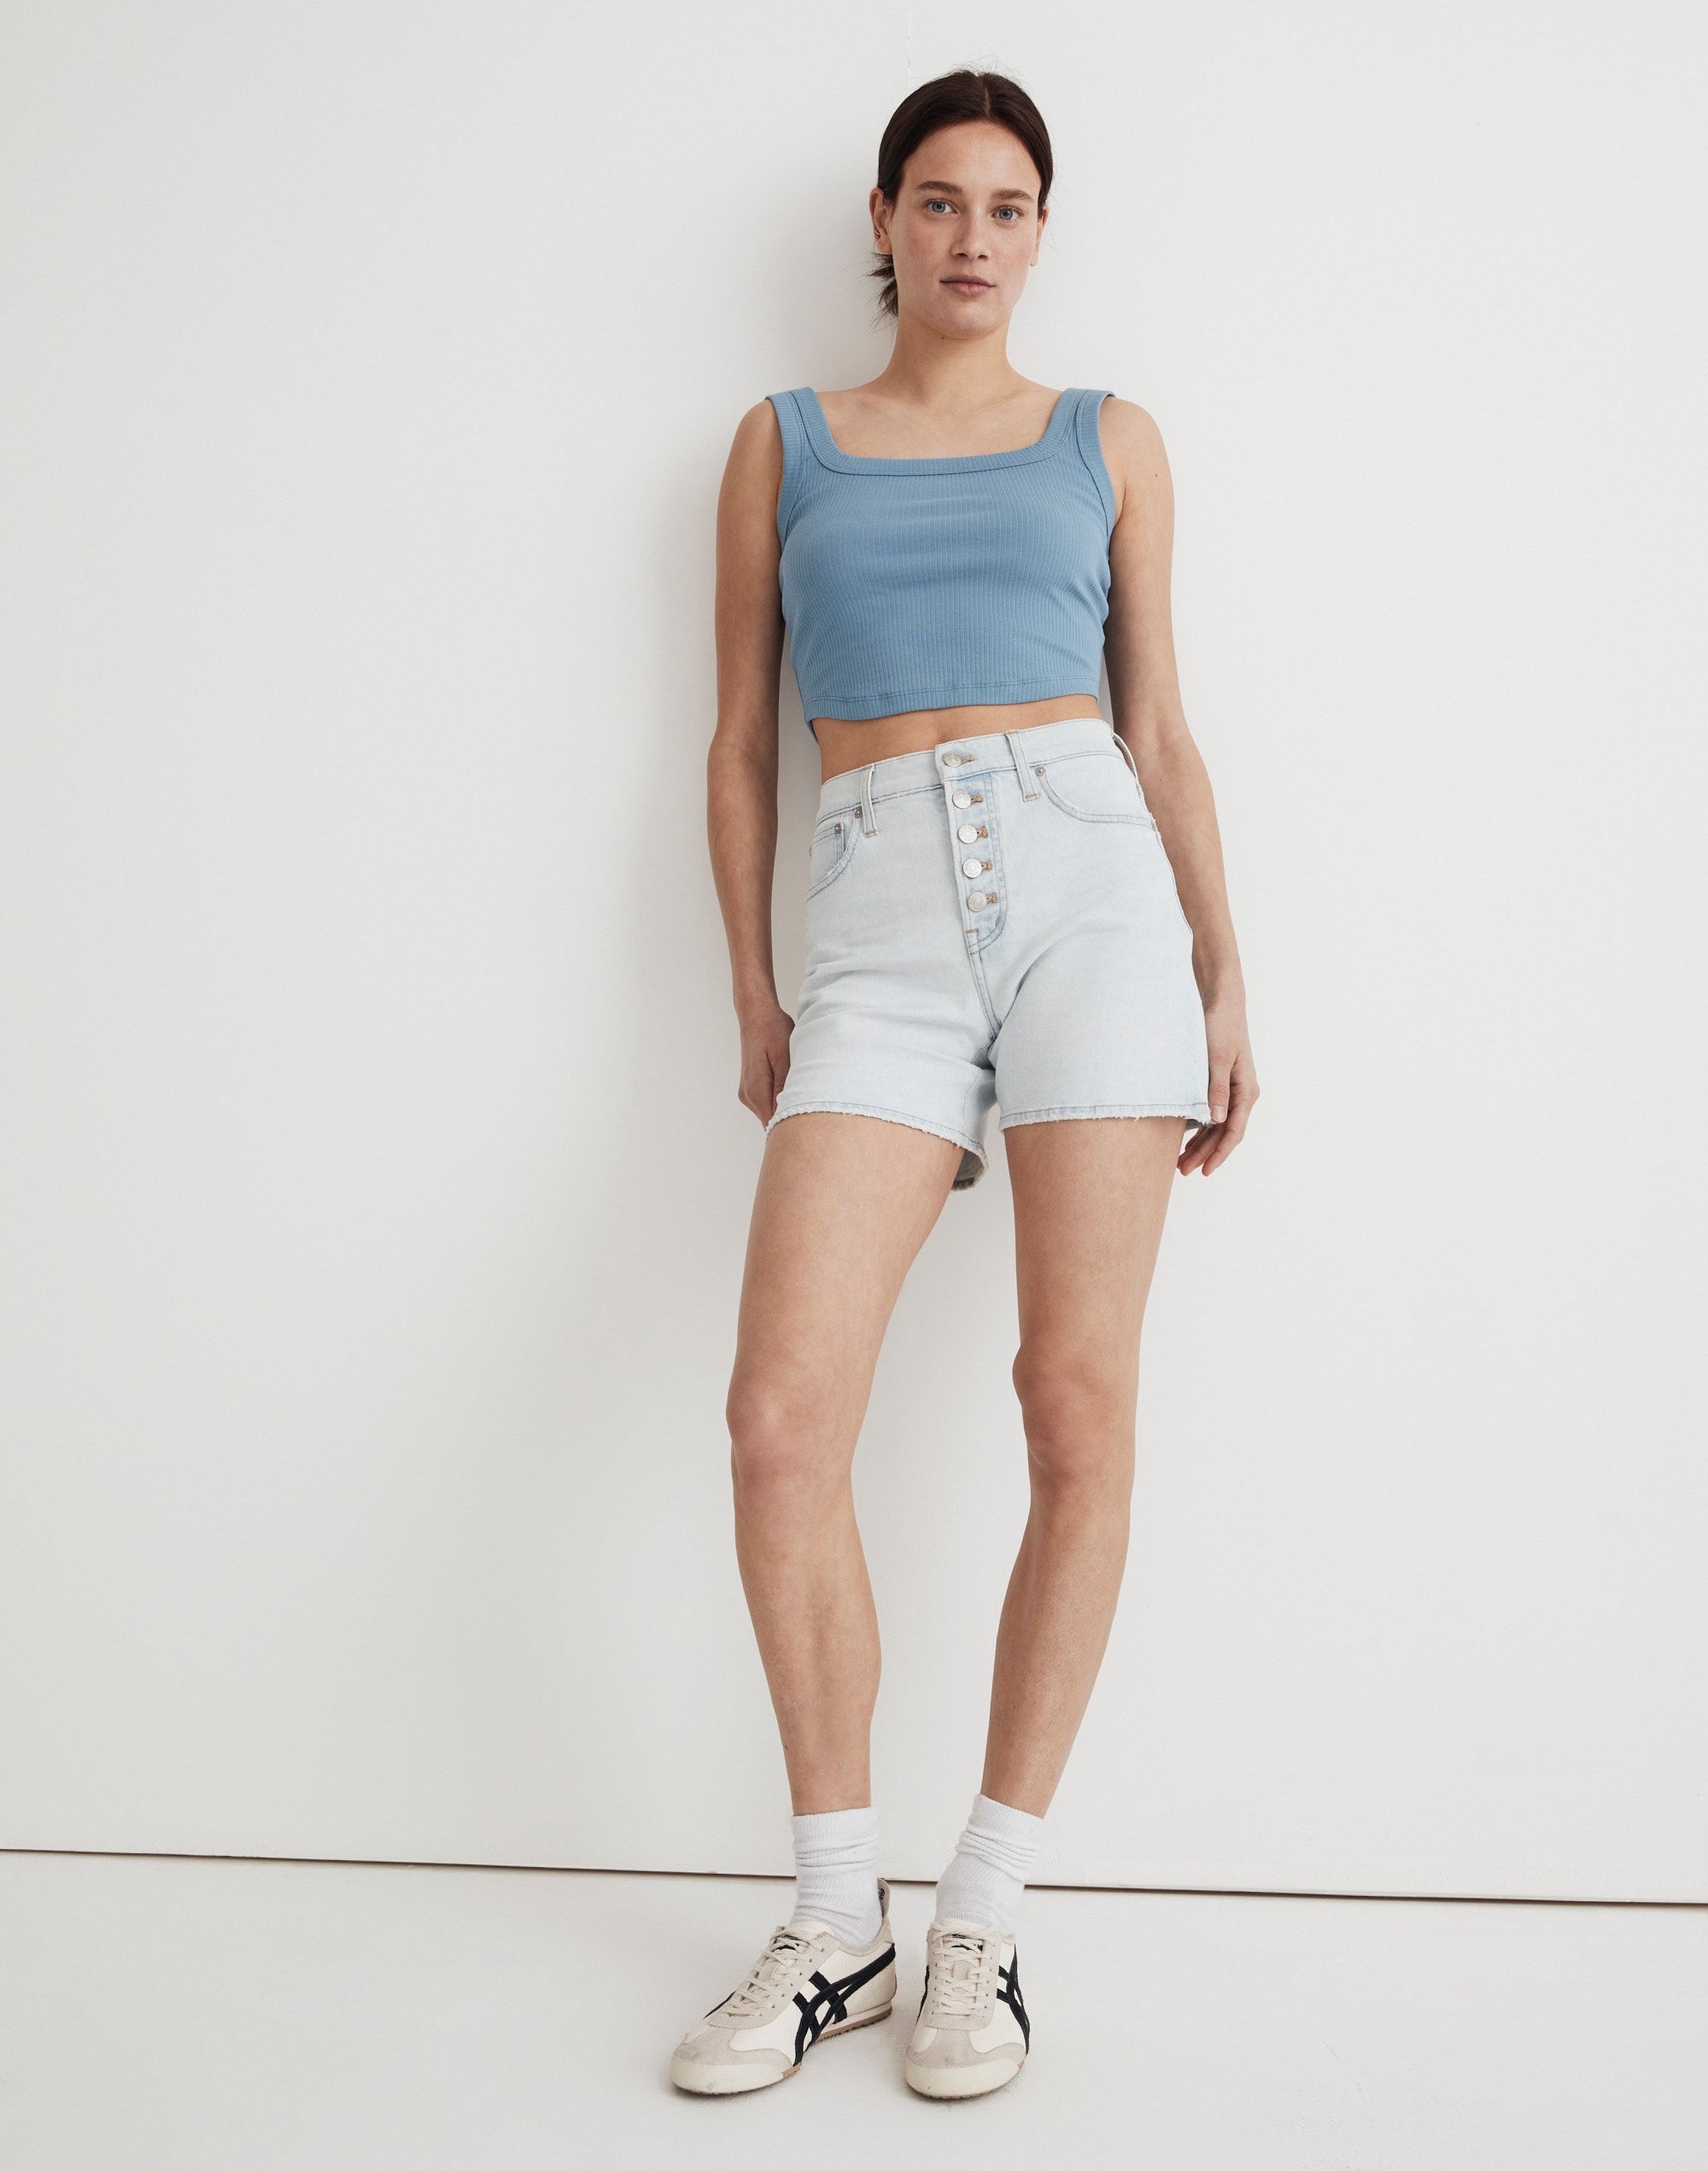 The Perfect Vintage Mid-Length Jean Short in Dayson Wash: Button-Fly Edition